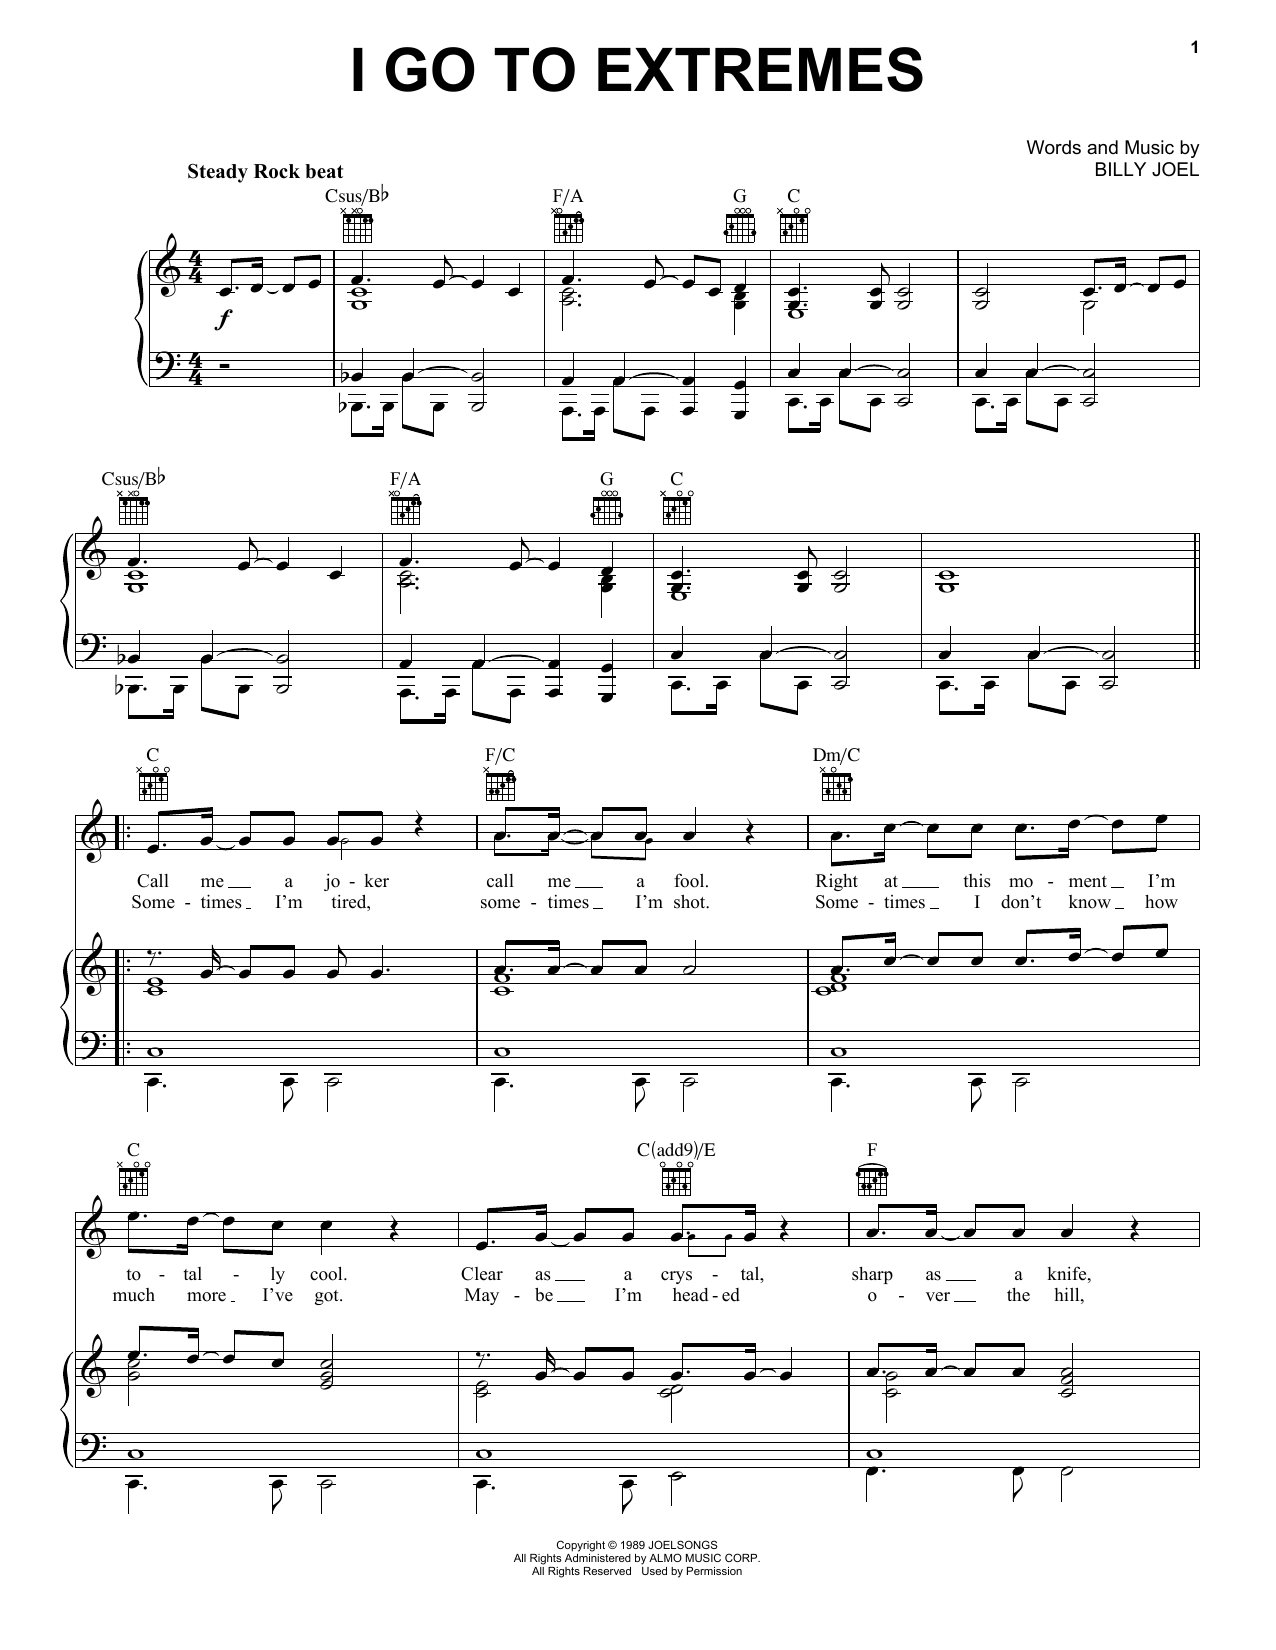 Billy Joel I Go To Extremes sheet music notes and chords. Download Printable PDF.